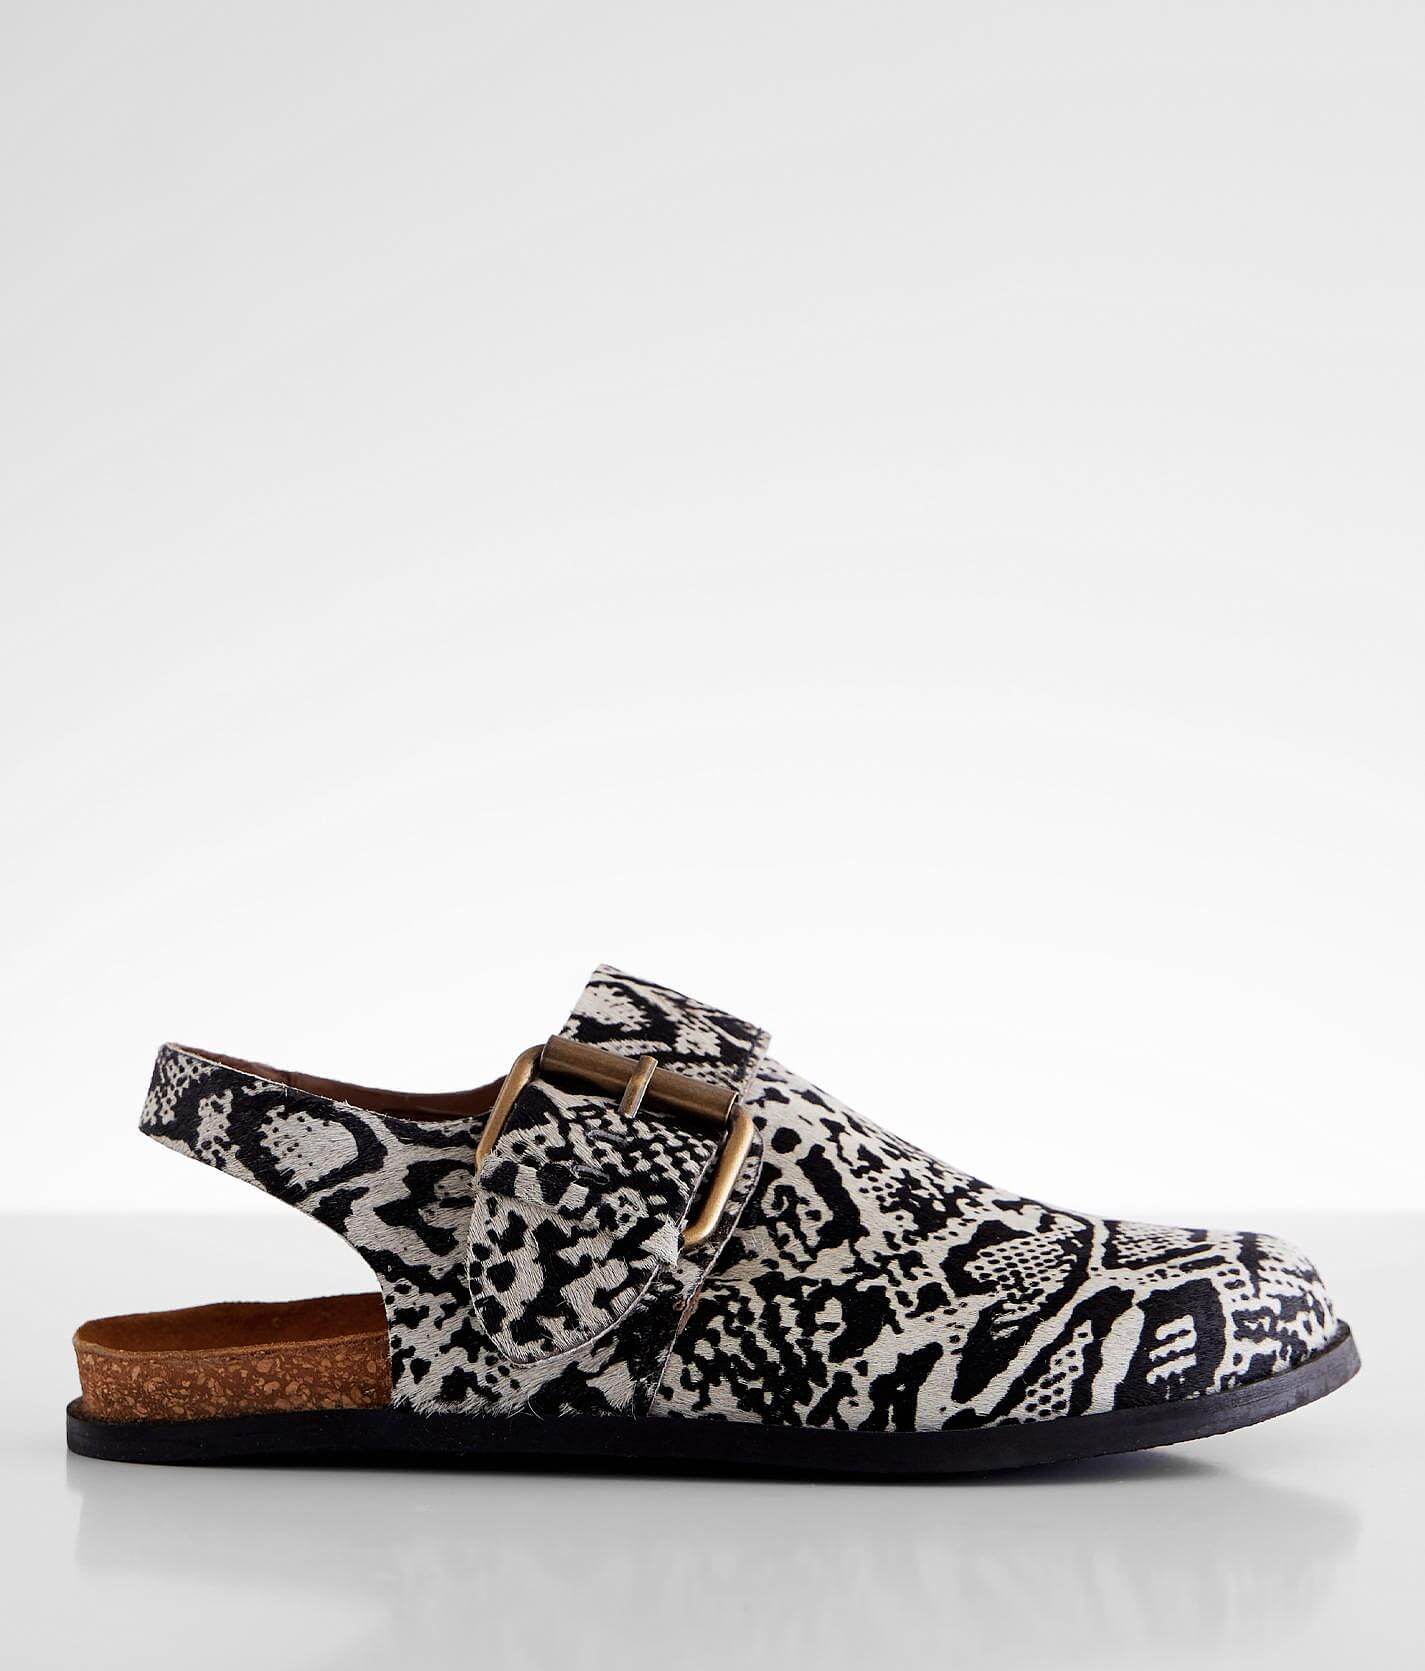 free people slip on shoes